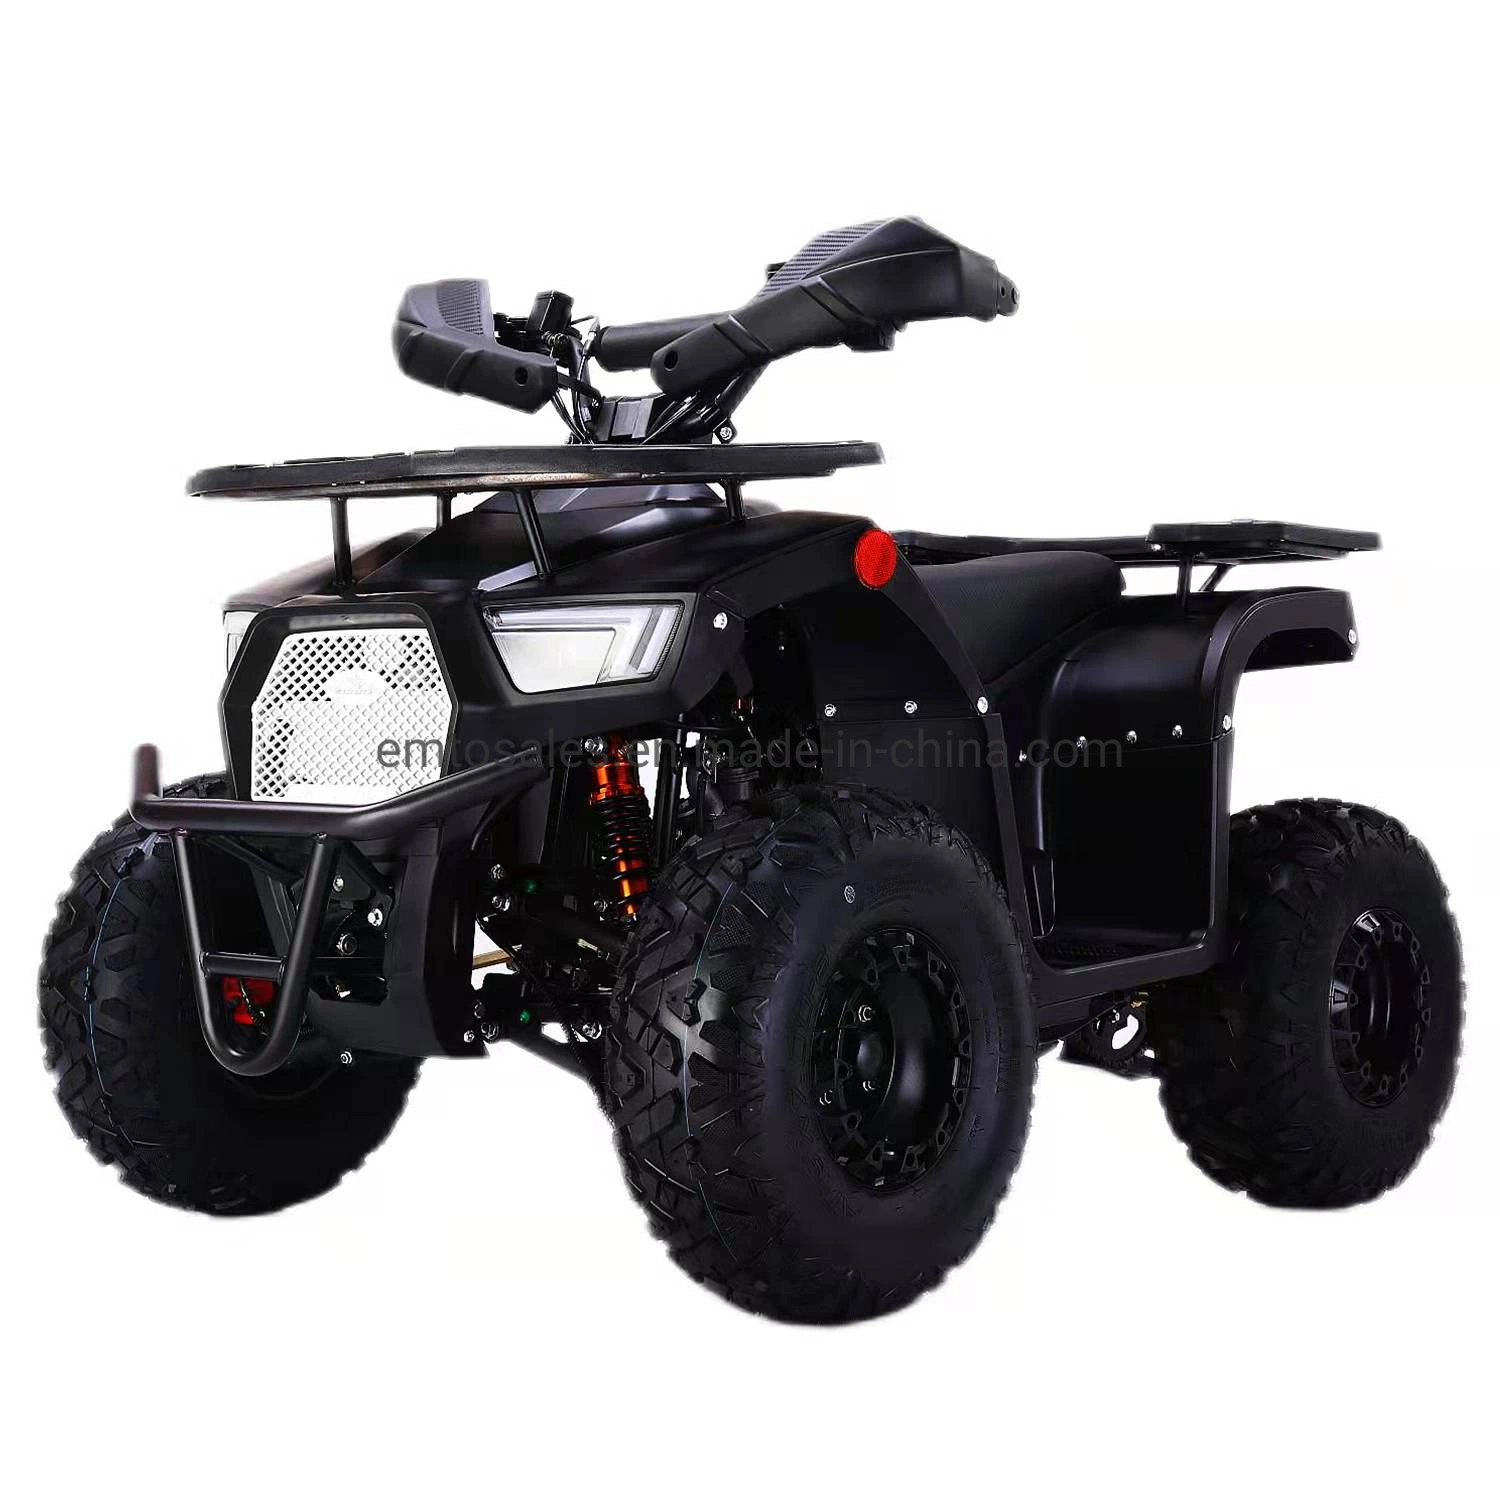 2022 New 125cc Sirius ATV Quad with High Quality Standard CE Approval